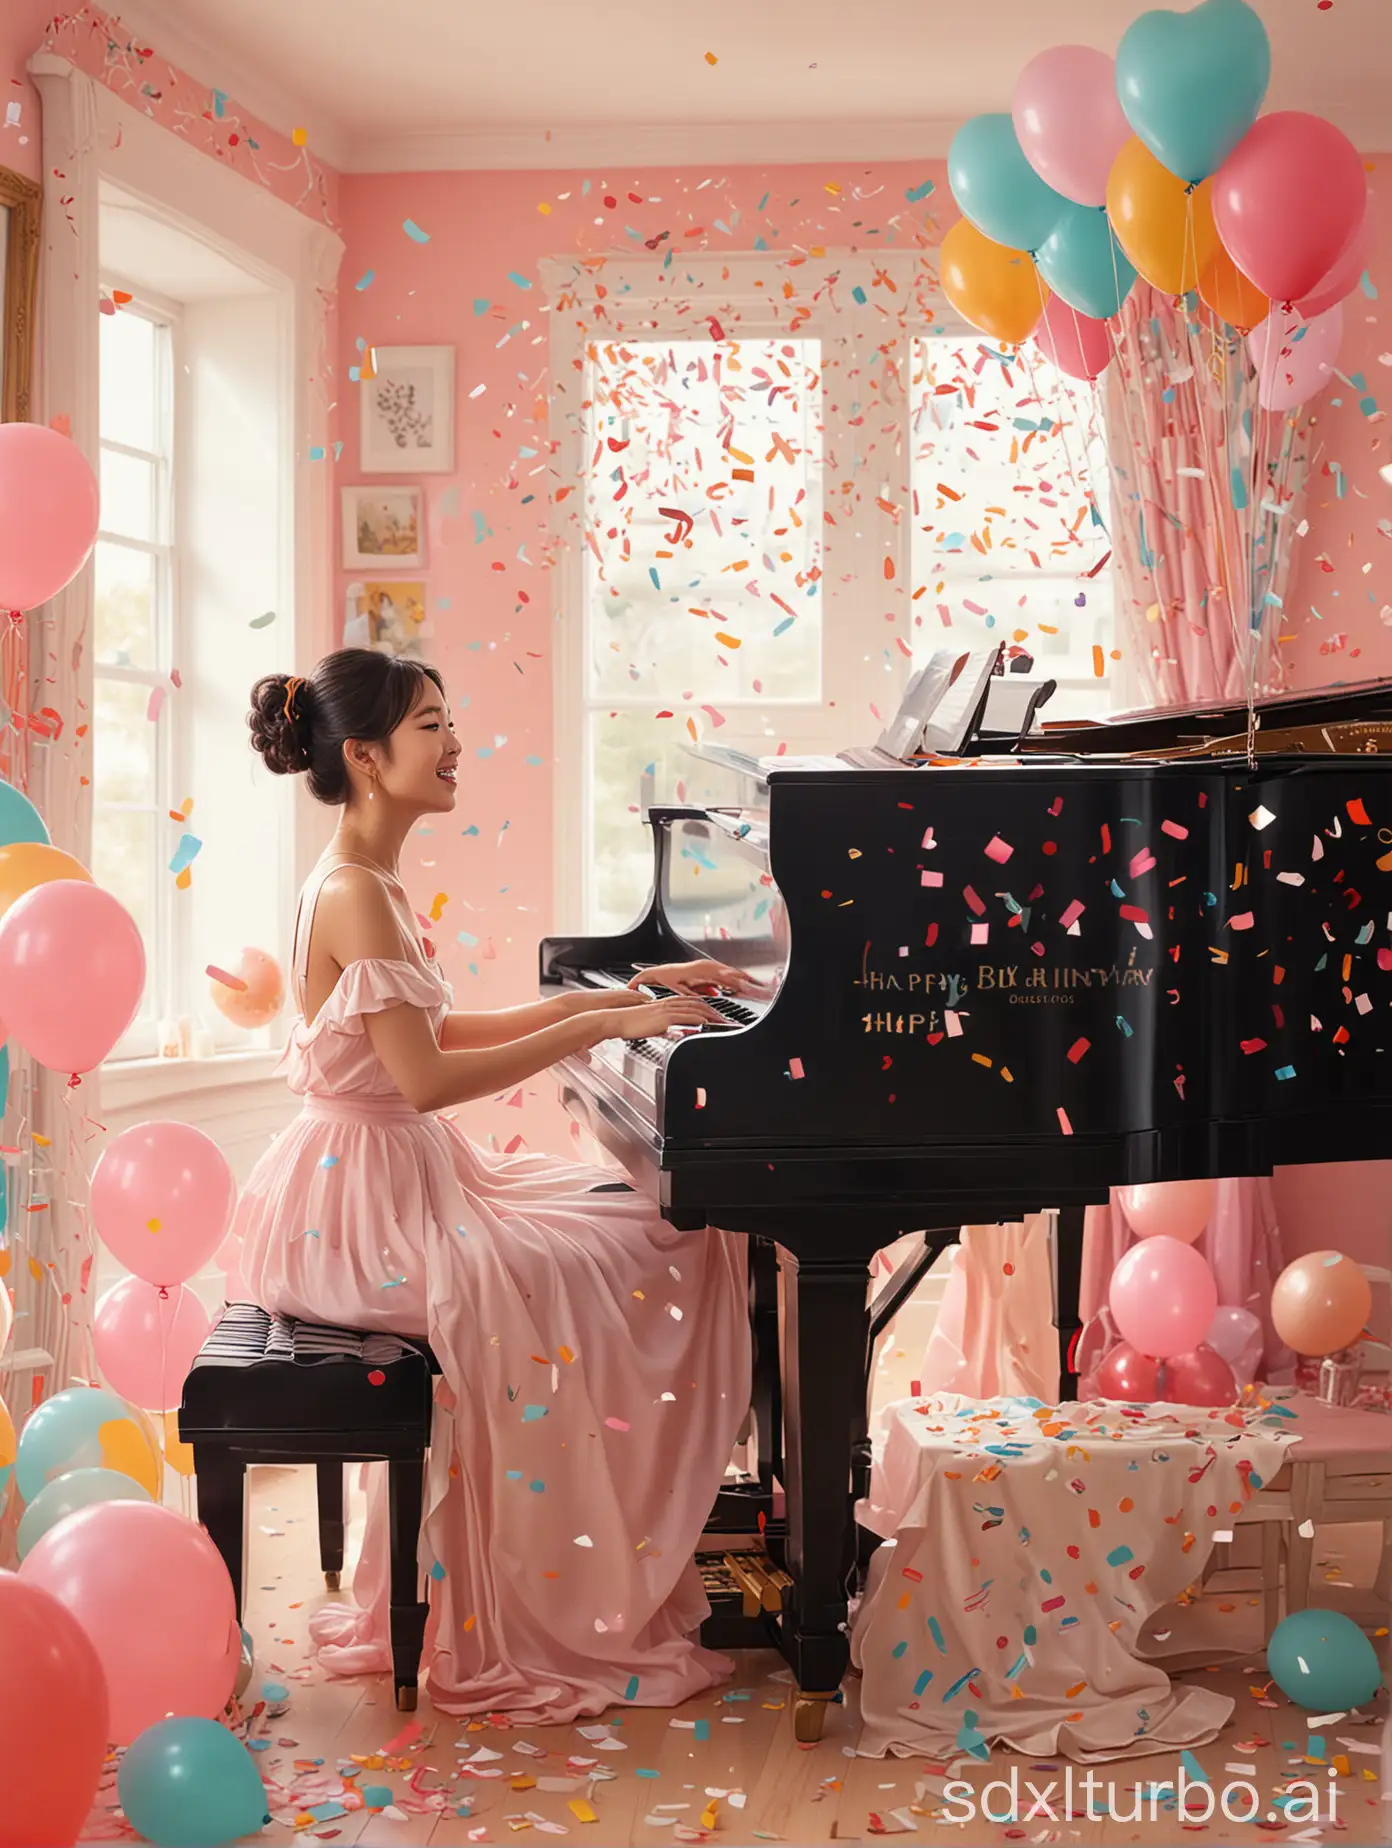 A delightful illustration of an Asian woman seated at a piano covered in vibrant heart-formed balloons and streamers, celebrating a birthday. With a joyful expression, she plays with two arms a lively and cheerful tune that fills the room. A birthday cake adorned with lit candles sits atop the piano, casting a warm glow over her smiling face. The atmosphere is further enhanced by musical notes that dance around her, and confetti gently descending from the sky. The soft pastel background adds to the celebratory and festive ambiance of this whimsical scene, write in white "Happy Birthday, my Dear Tiffany!", illustration